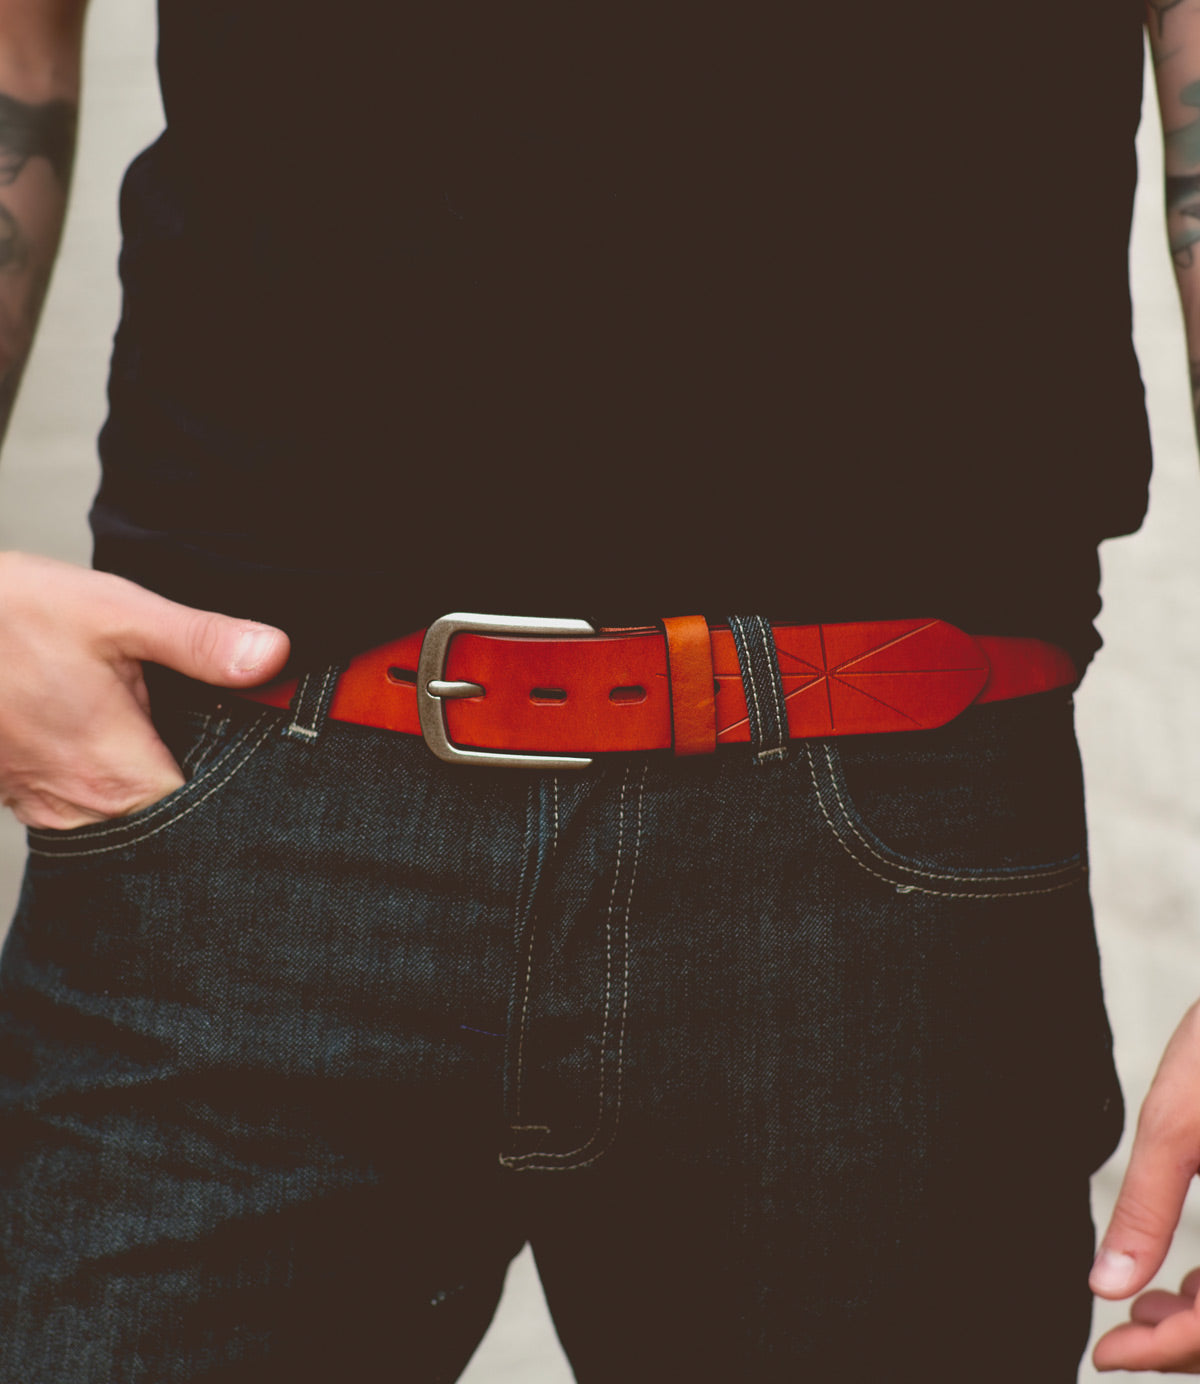 A person wearing a black shirt, dark jeans, and a brown leather Bed Stu Westham belt with a removable silver buckle featuring a stamped star design, shown from the waist down.